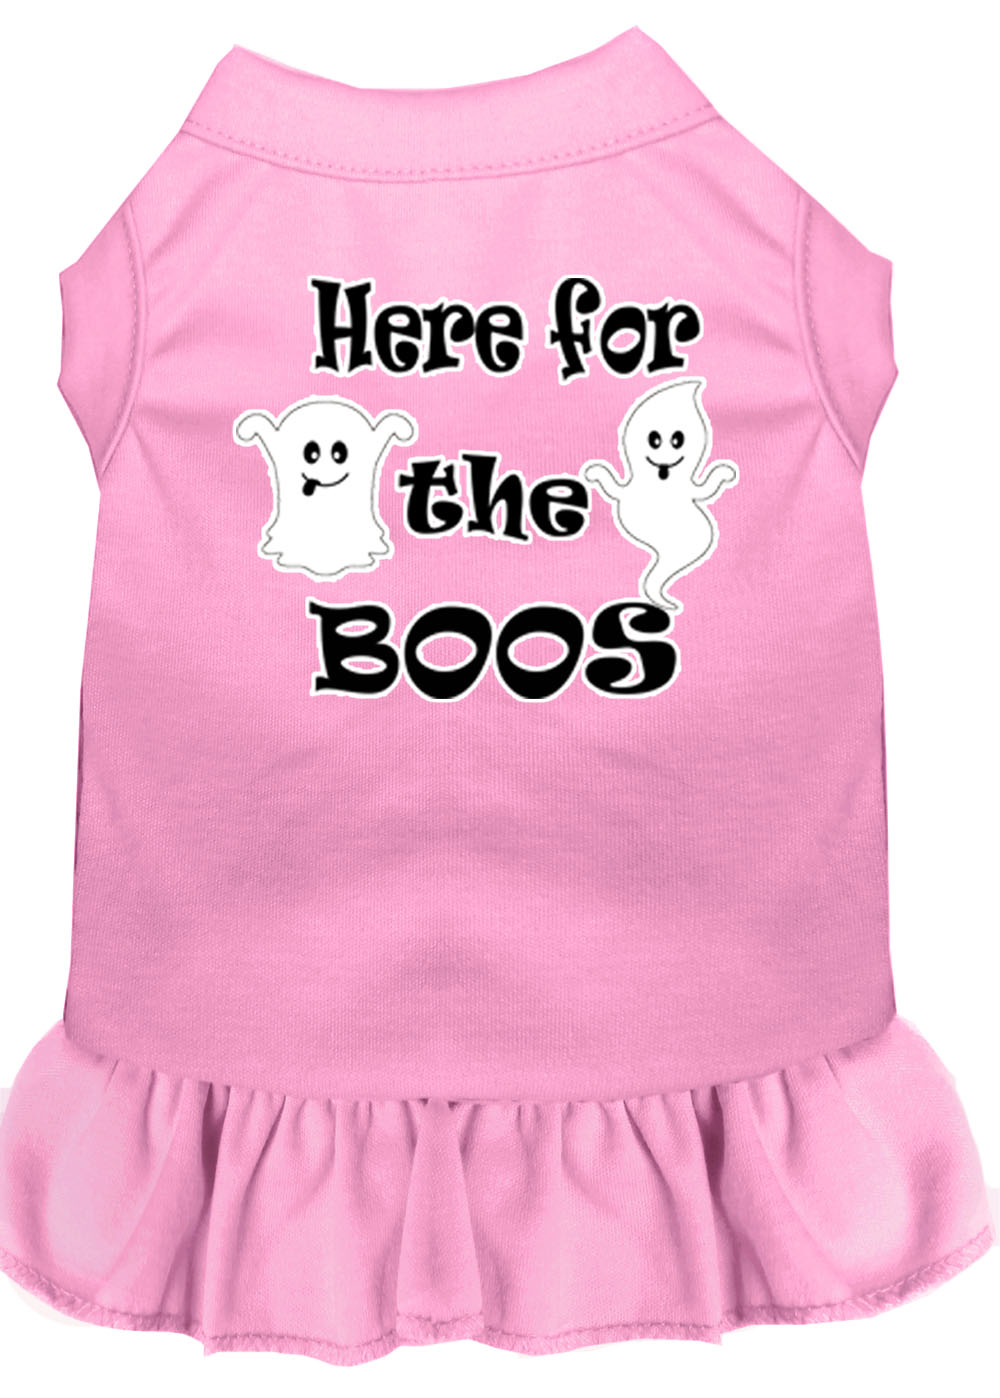 Here for the Boos Screen Print Dog Dress Light Pink Med